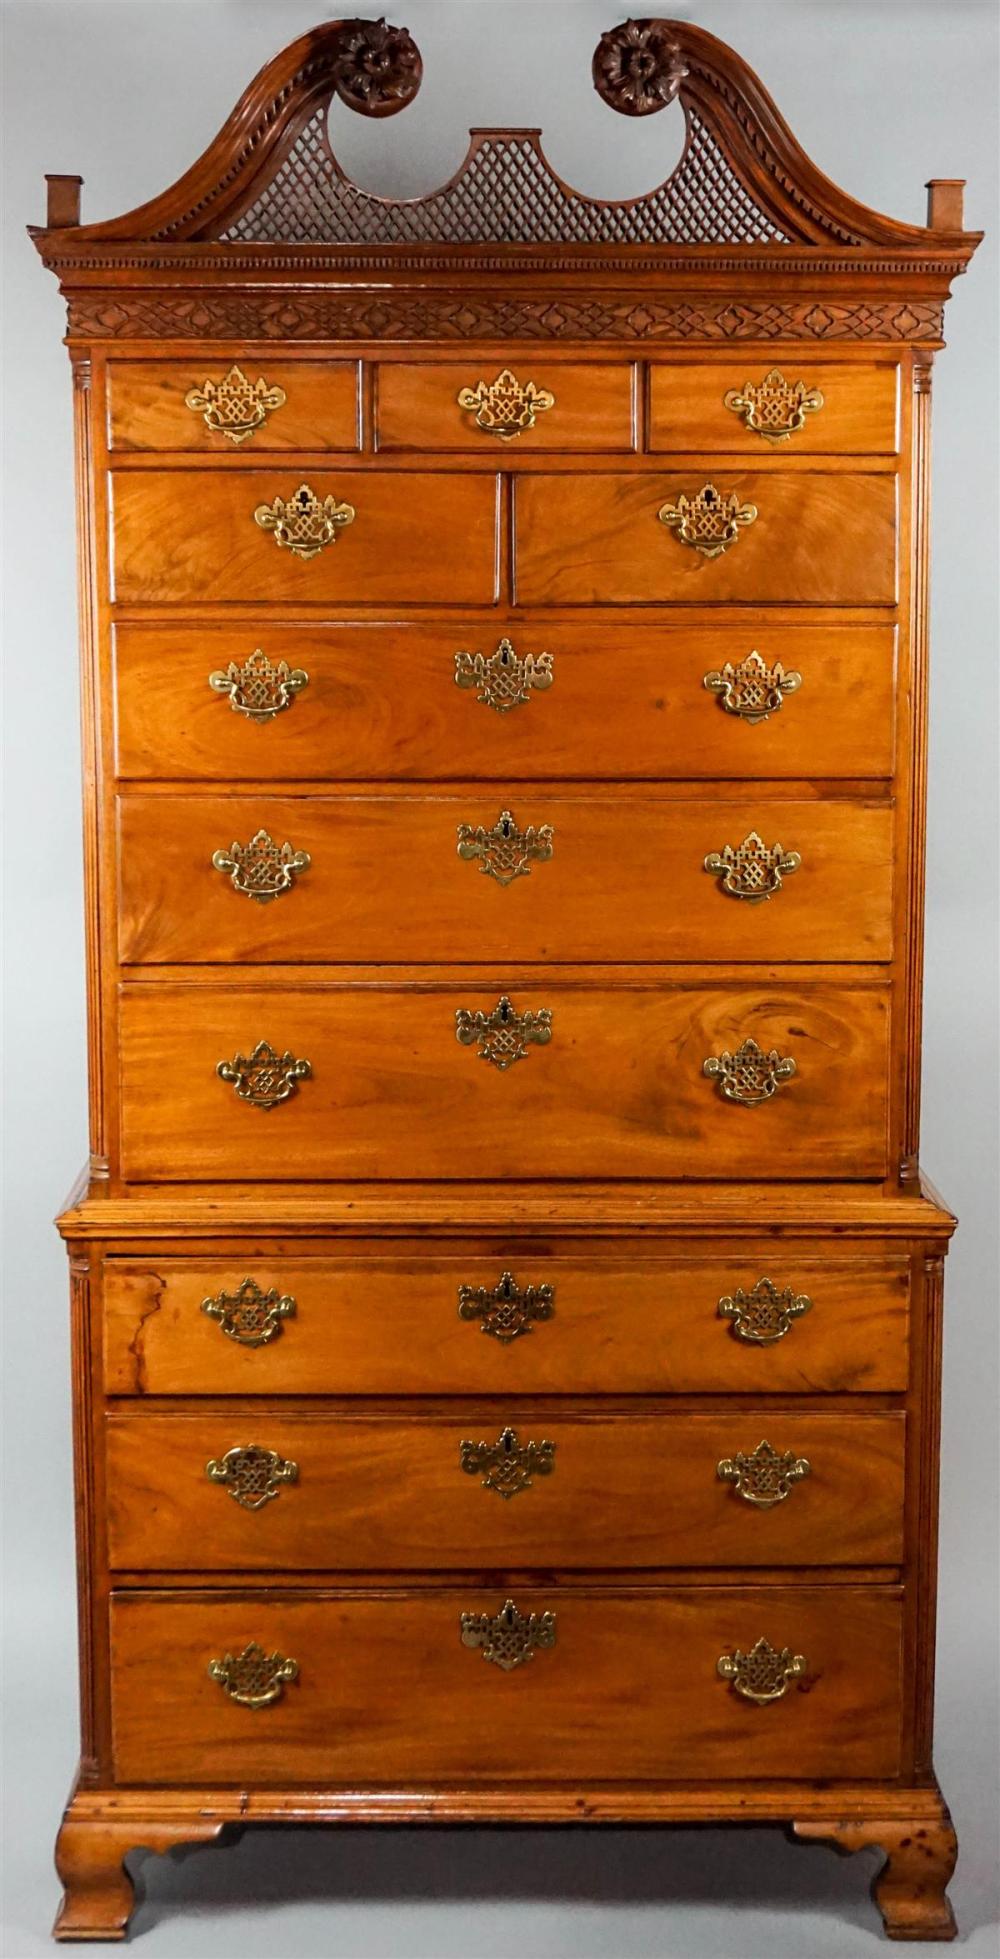 FINE CHIPPENDALE CARVED MAHOGANY 313c0b